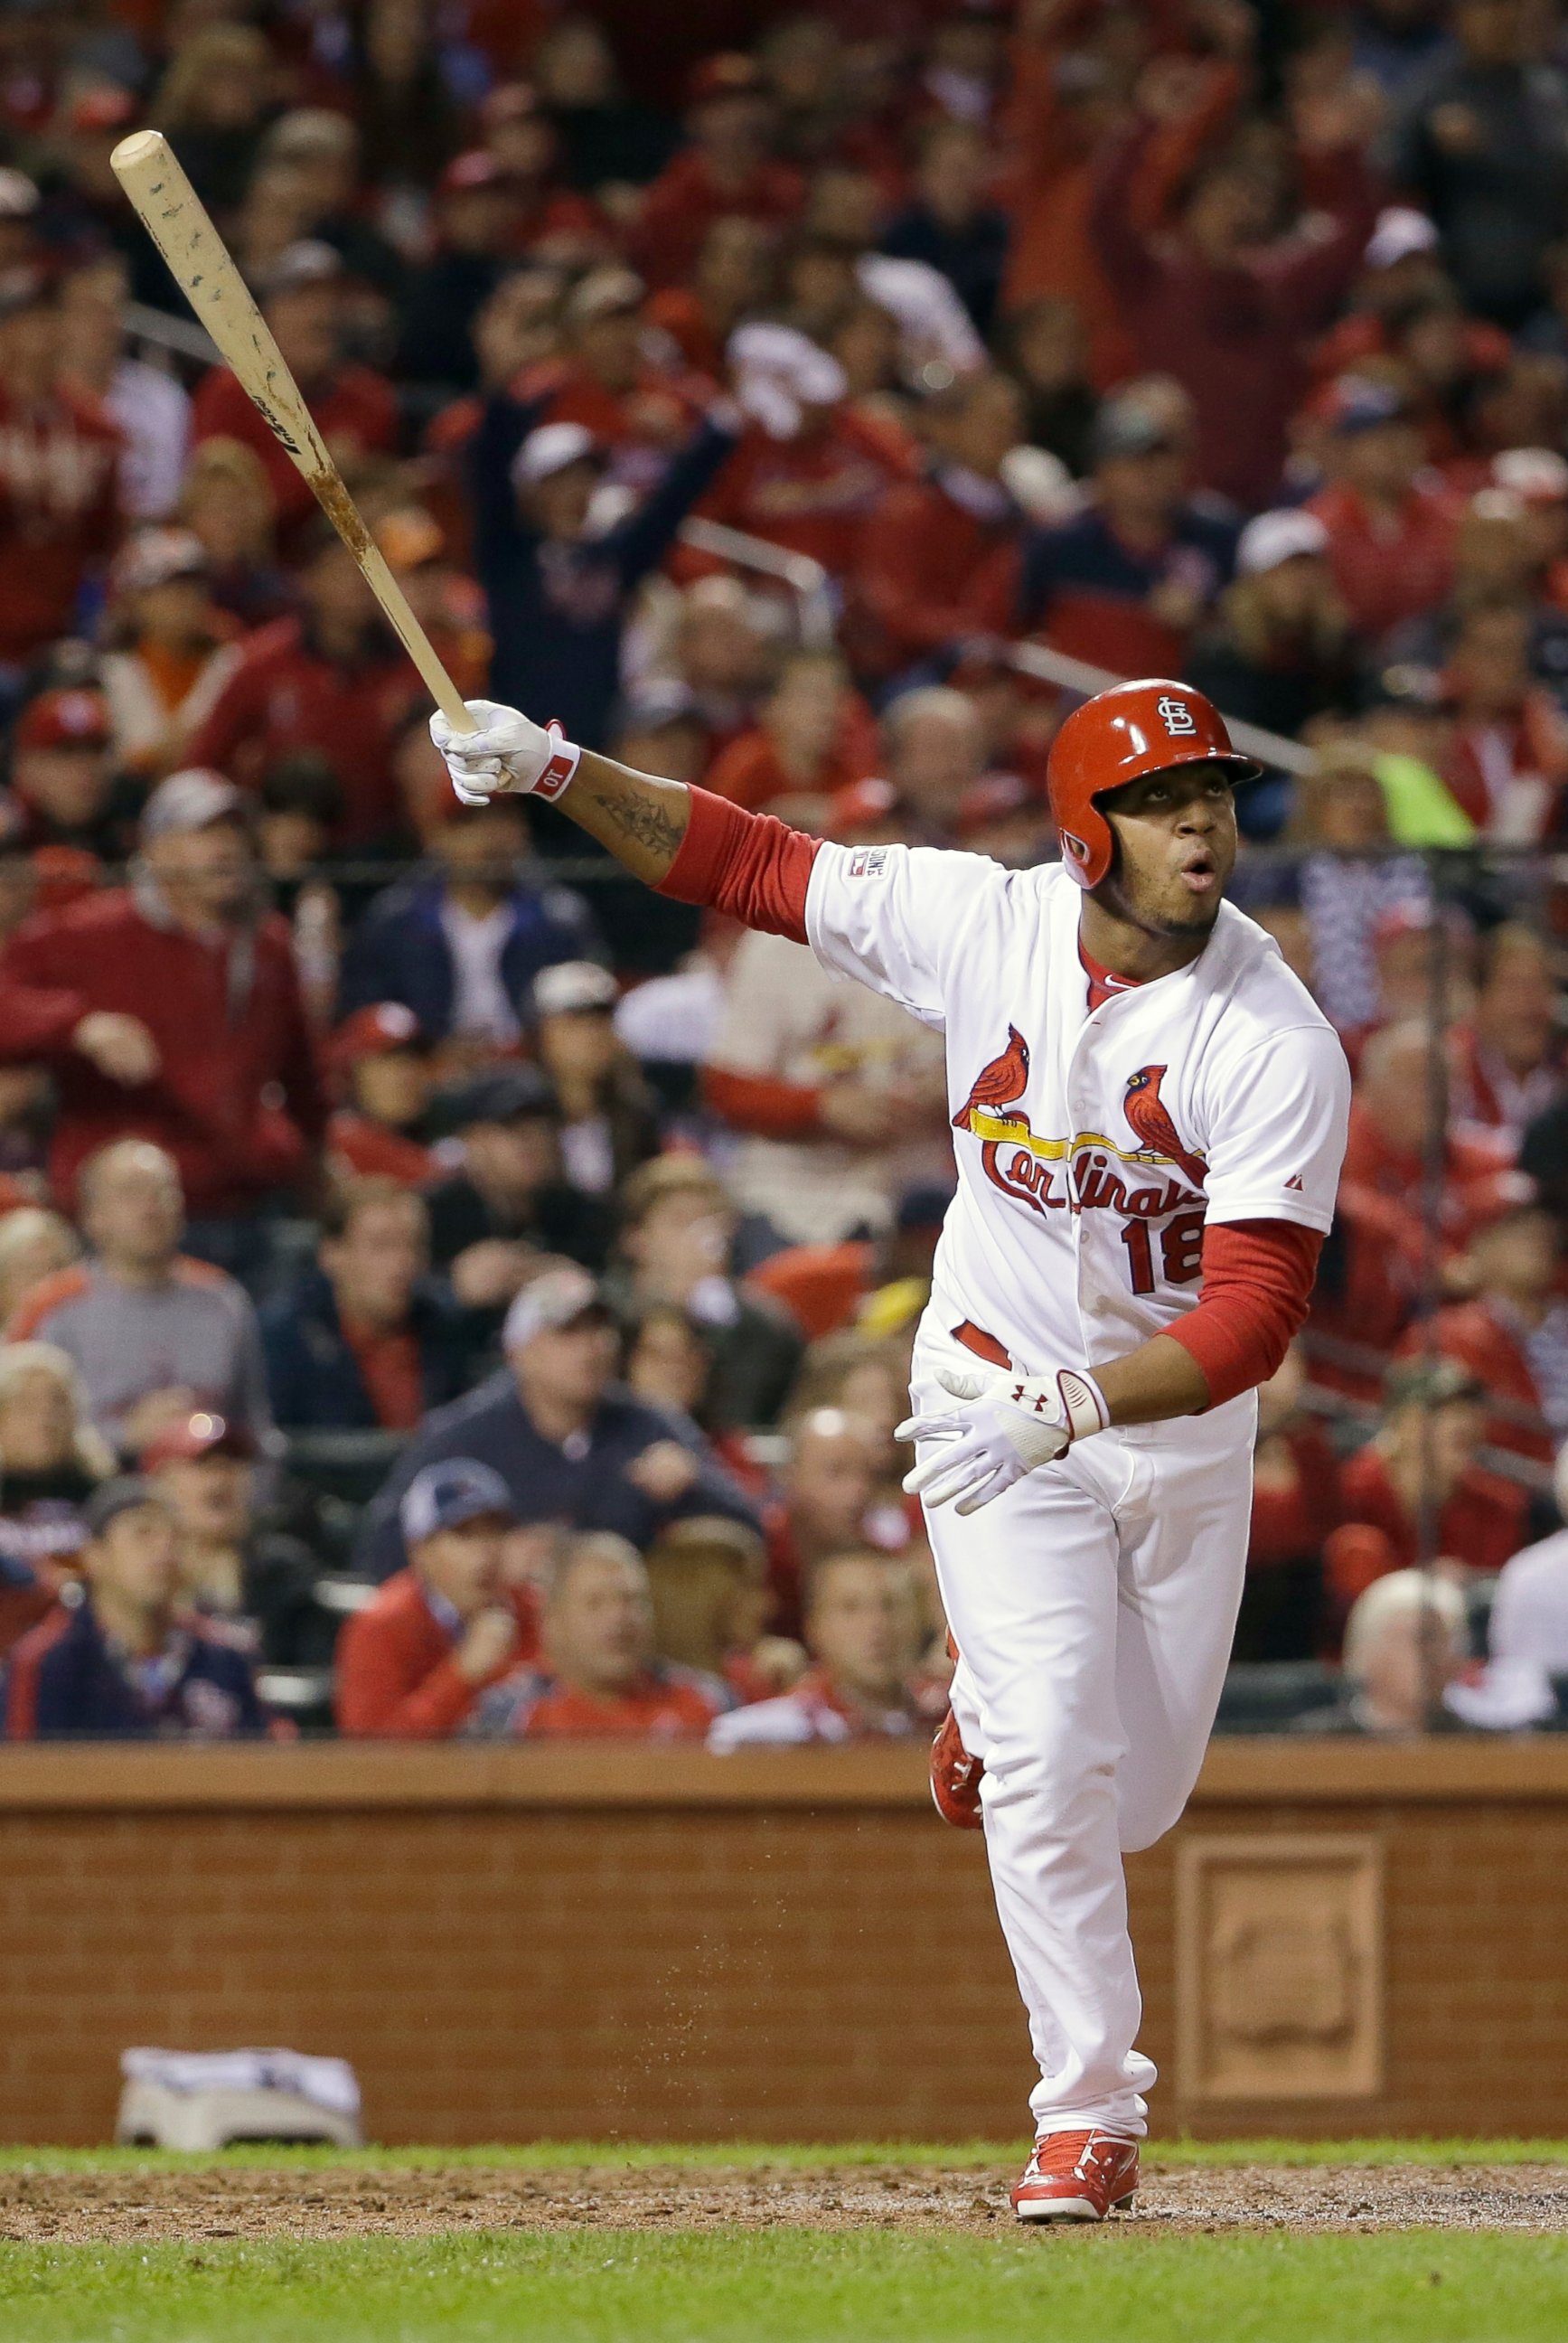 St. Louis Cardinals' Oscar Taveras hits a home run during the seventh inning in Game 2 of the National League baseball championship series against the San Francisco Giants, Oct. 12, 2014, in St. Louis.